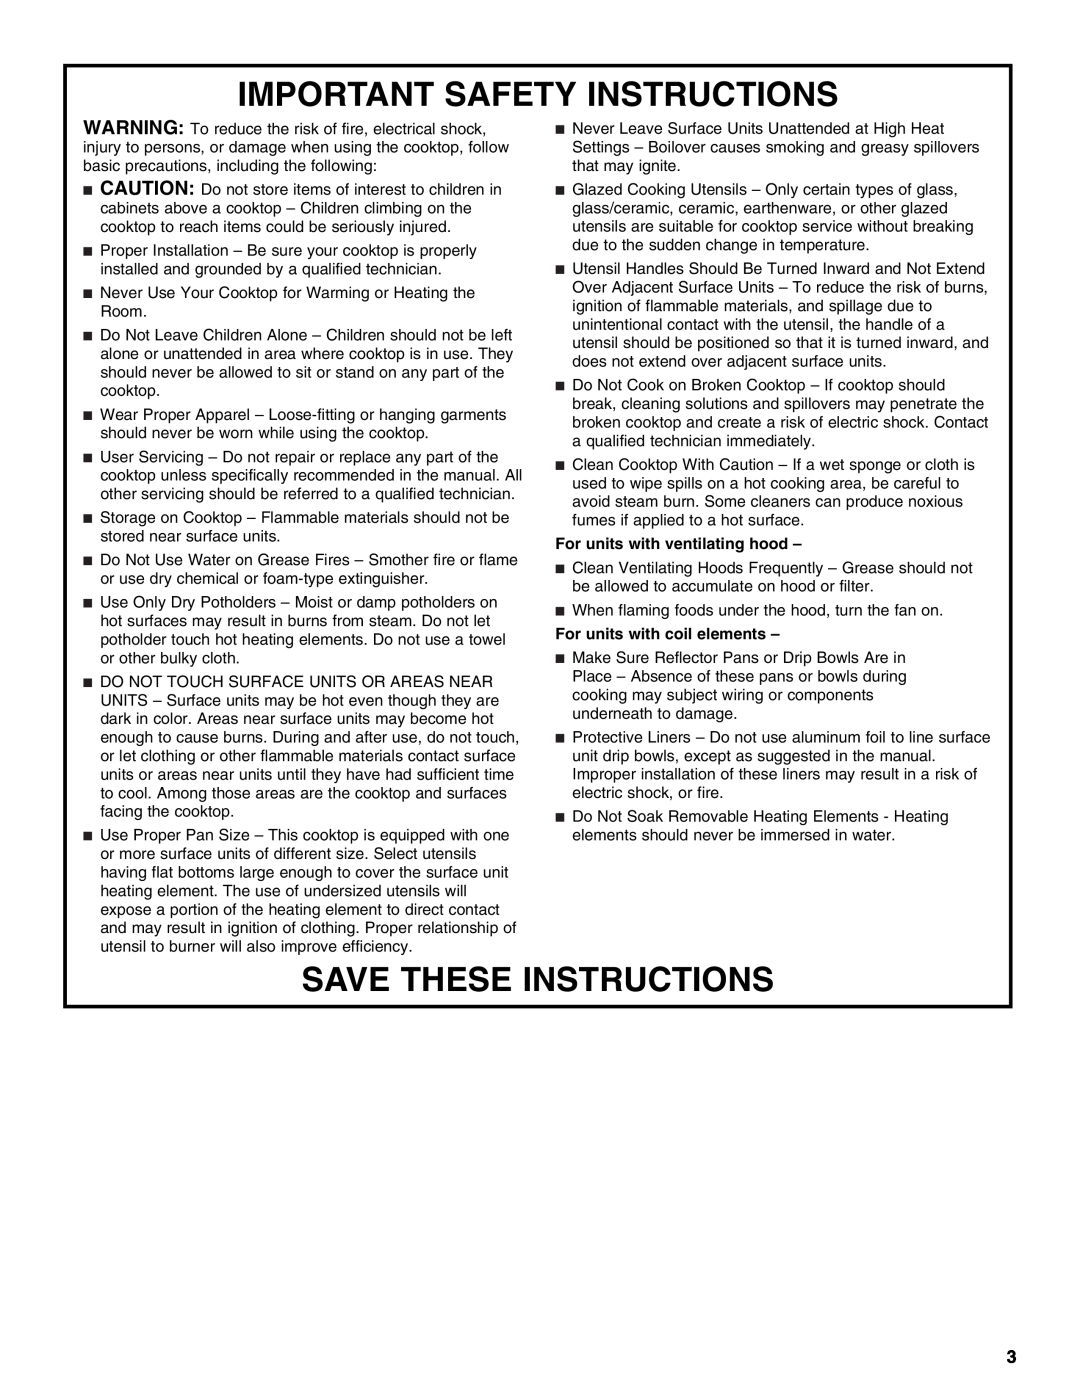 Jenn-Air W10298938A manual Important Safety Instructions, Save These Instructions, For units with ventilating hood 